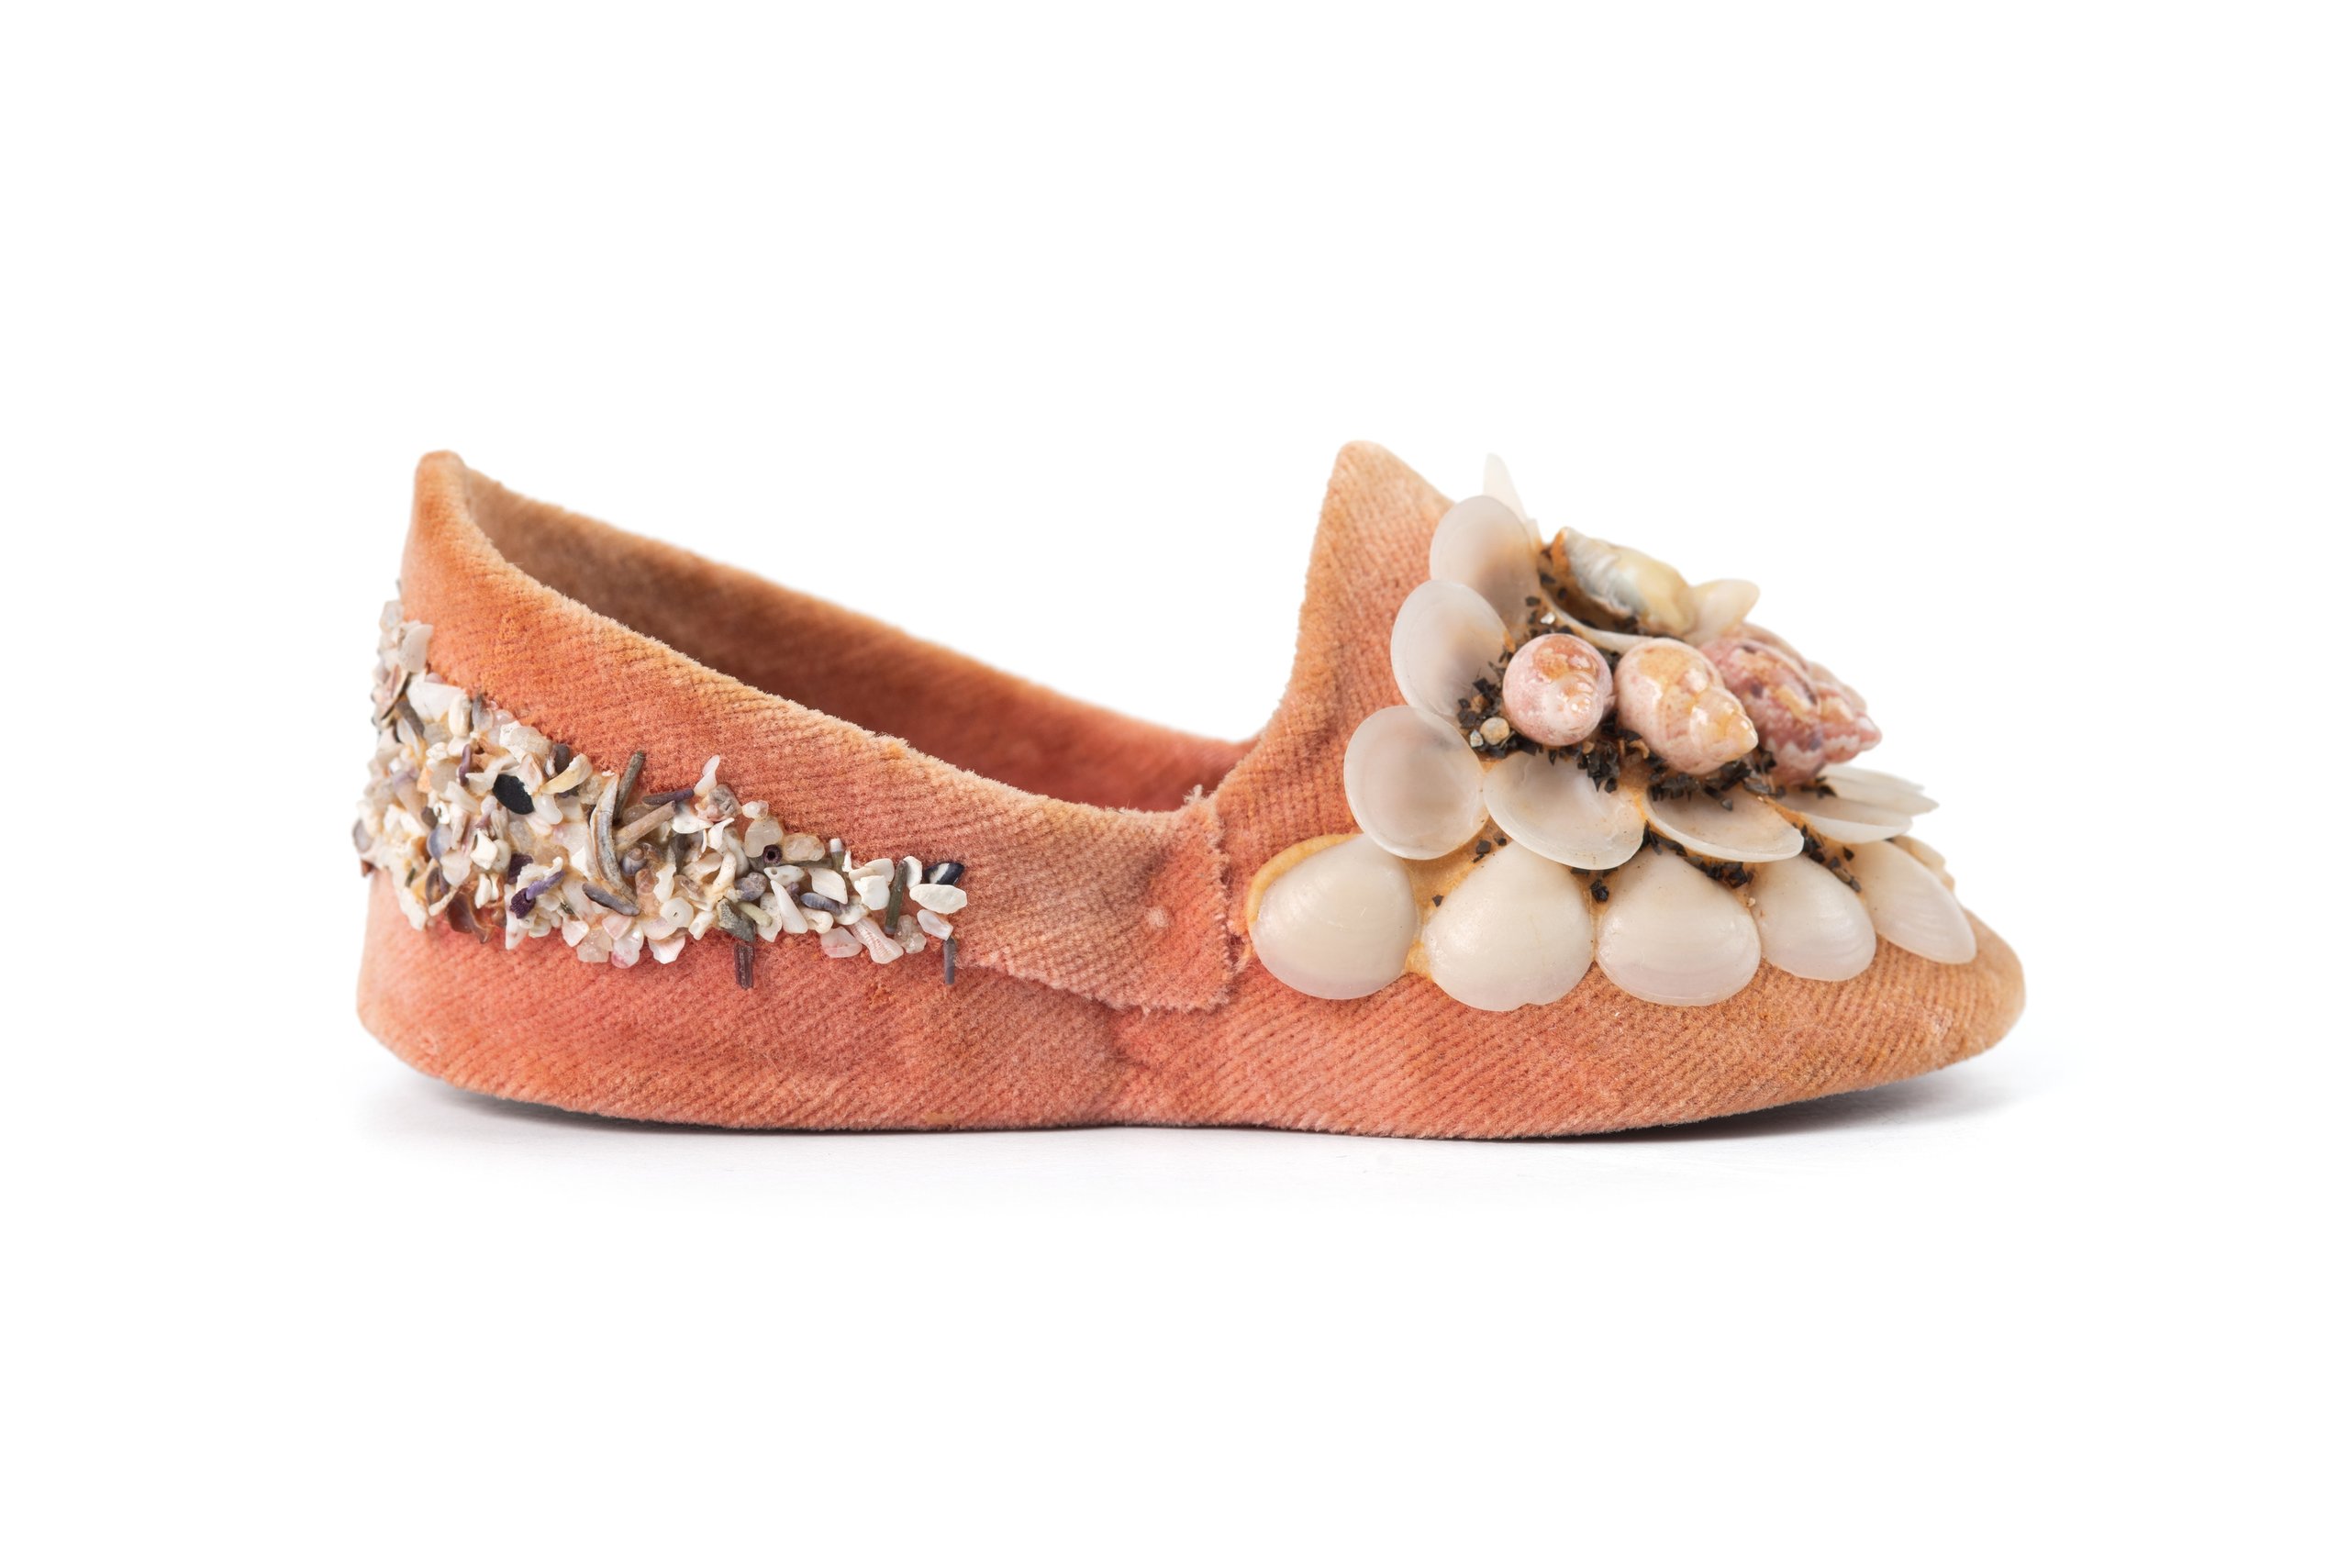 Miniature shell slippers from La Perouse